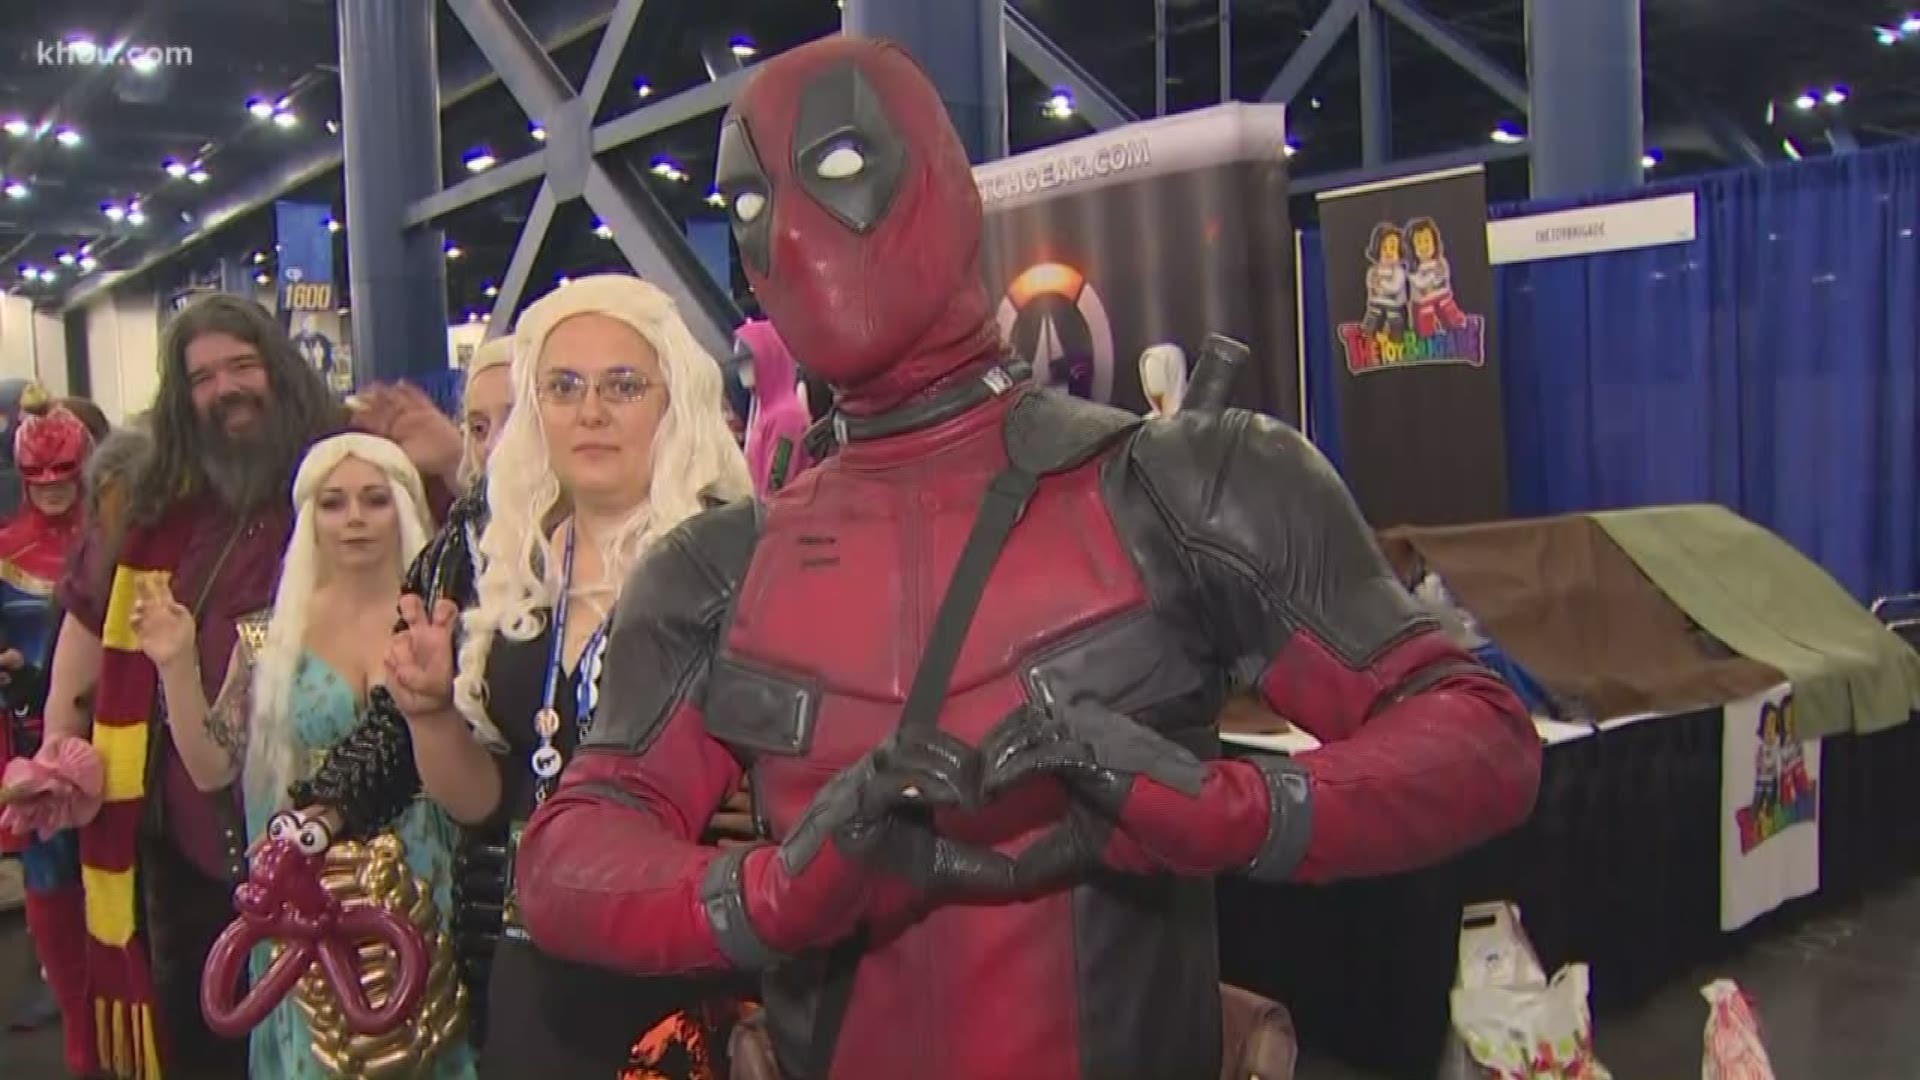 It's a comic fan's paradise – Comicpalooza kicks off later today at the GRB! Several big-name stars will be there this year, including “Game of Thrones” actress Emilia Clarke.